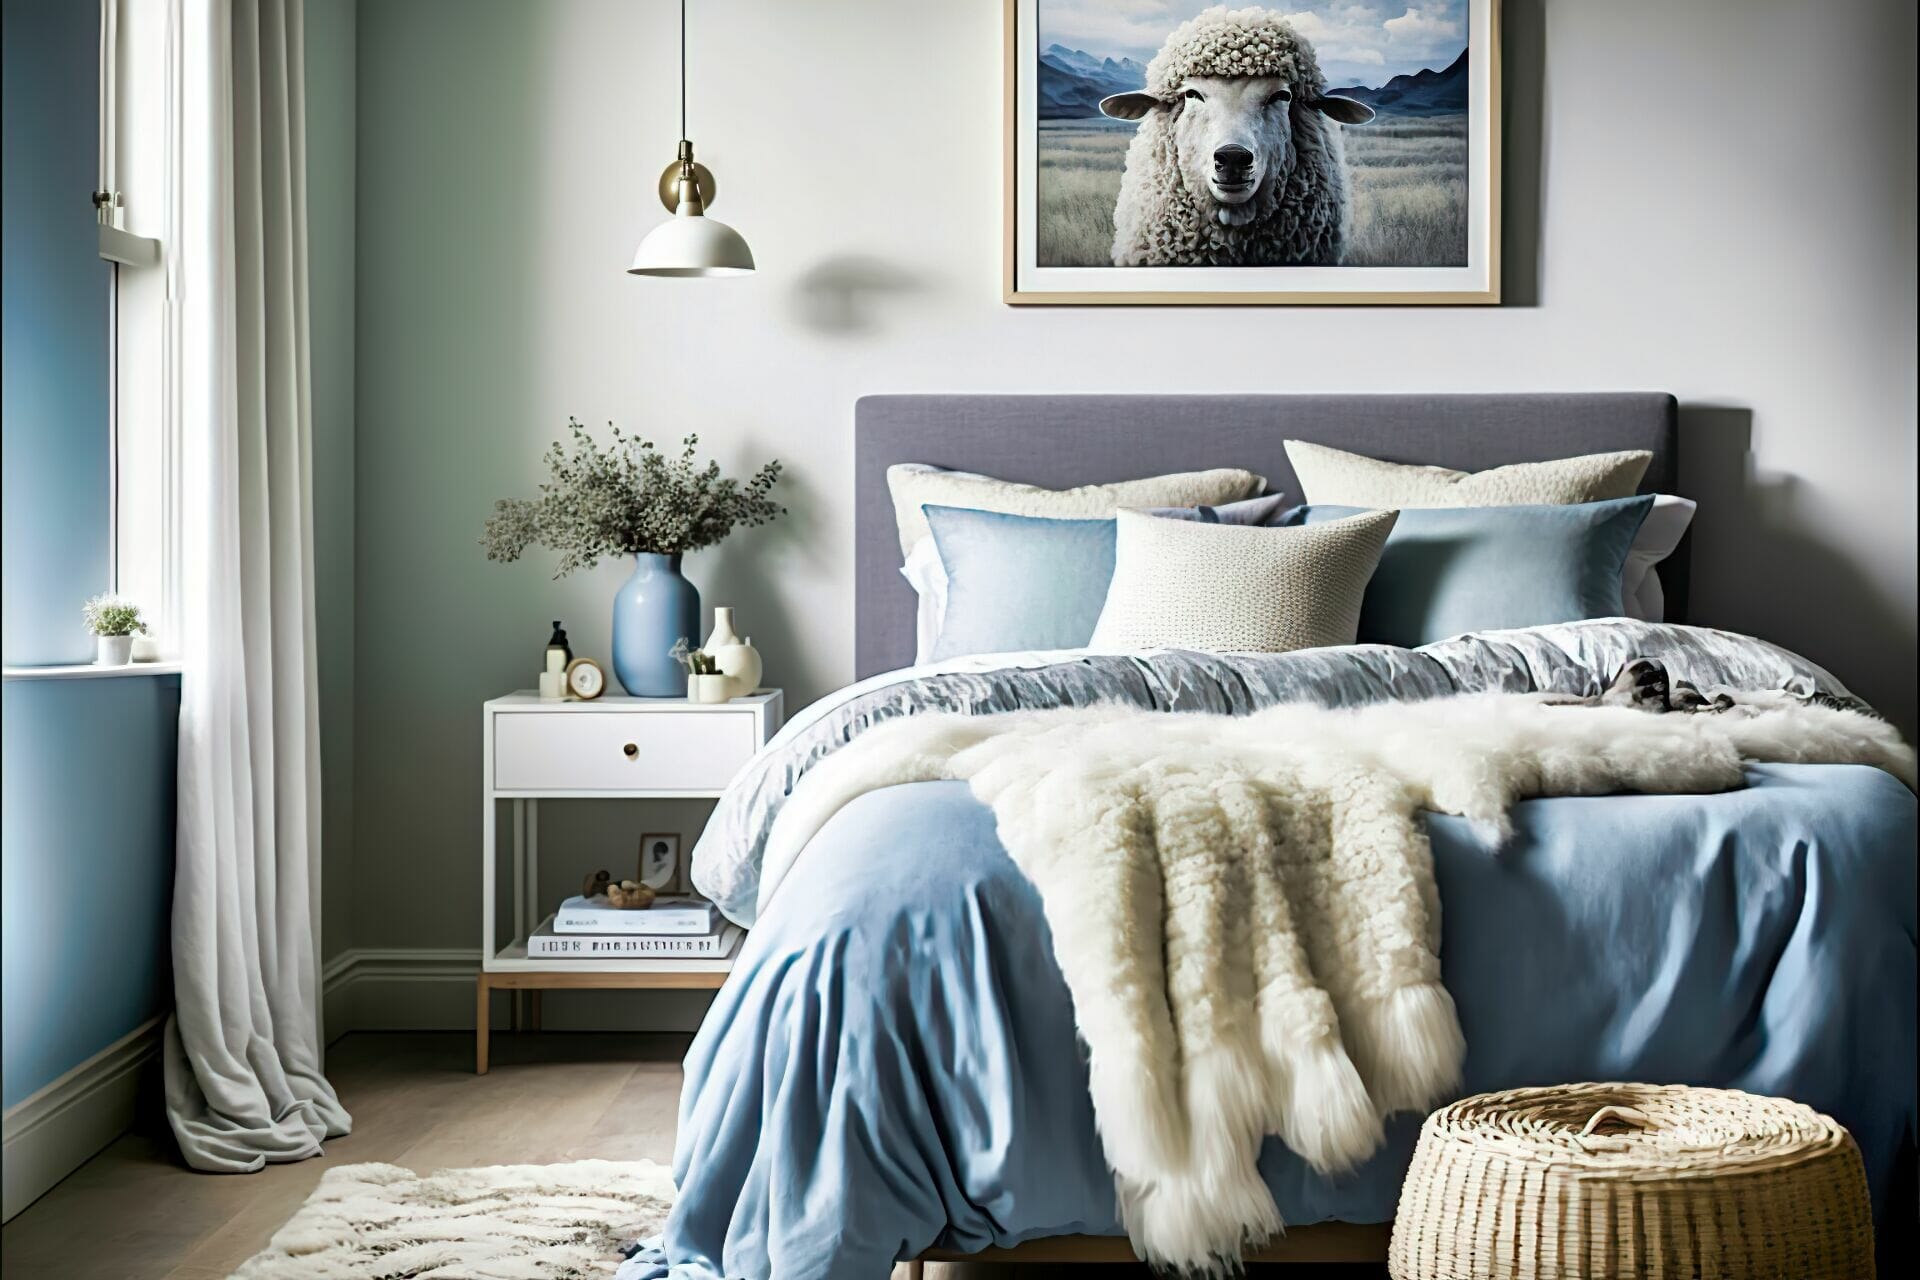 A Scandinavian Style Bedroom With Soft Blues And Greys – This Calming Bedroom Is Decorated With Shades Of Soft Blue, Grey, And White. The Walls Are A Light Blue, While The Bed Frame And Nightstand Are A Grey Wood. To Complete The Look, A White Sheepskin Rug Lies On The Floor, And Various Art Prints Hang On The Walls.